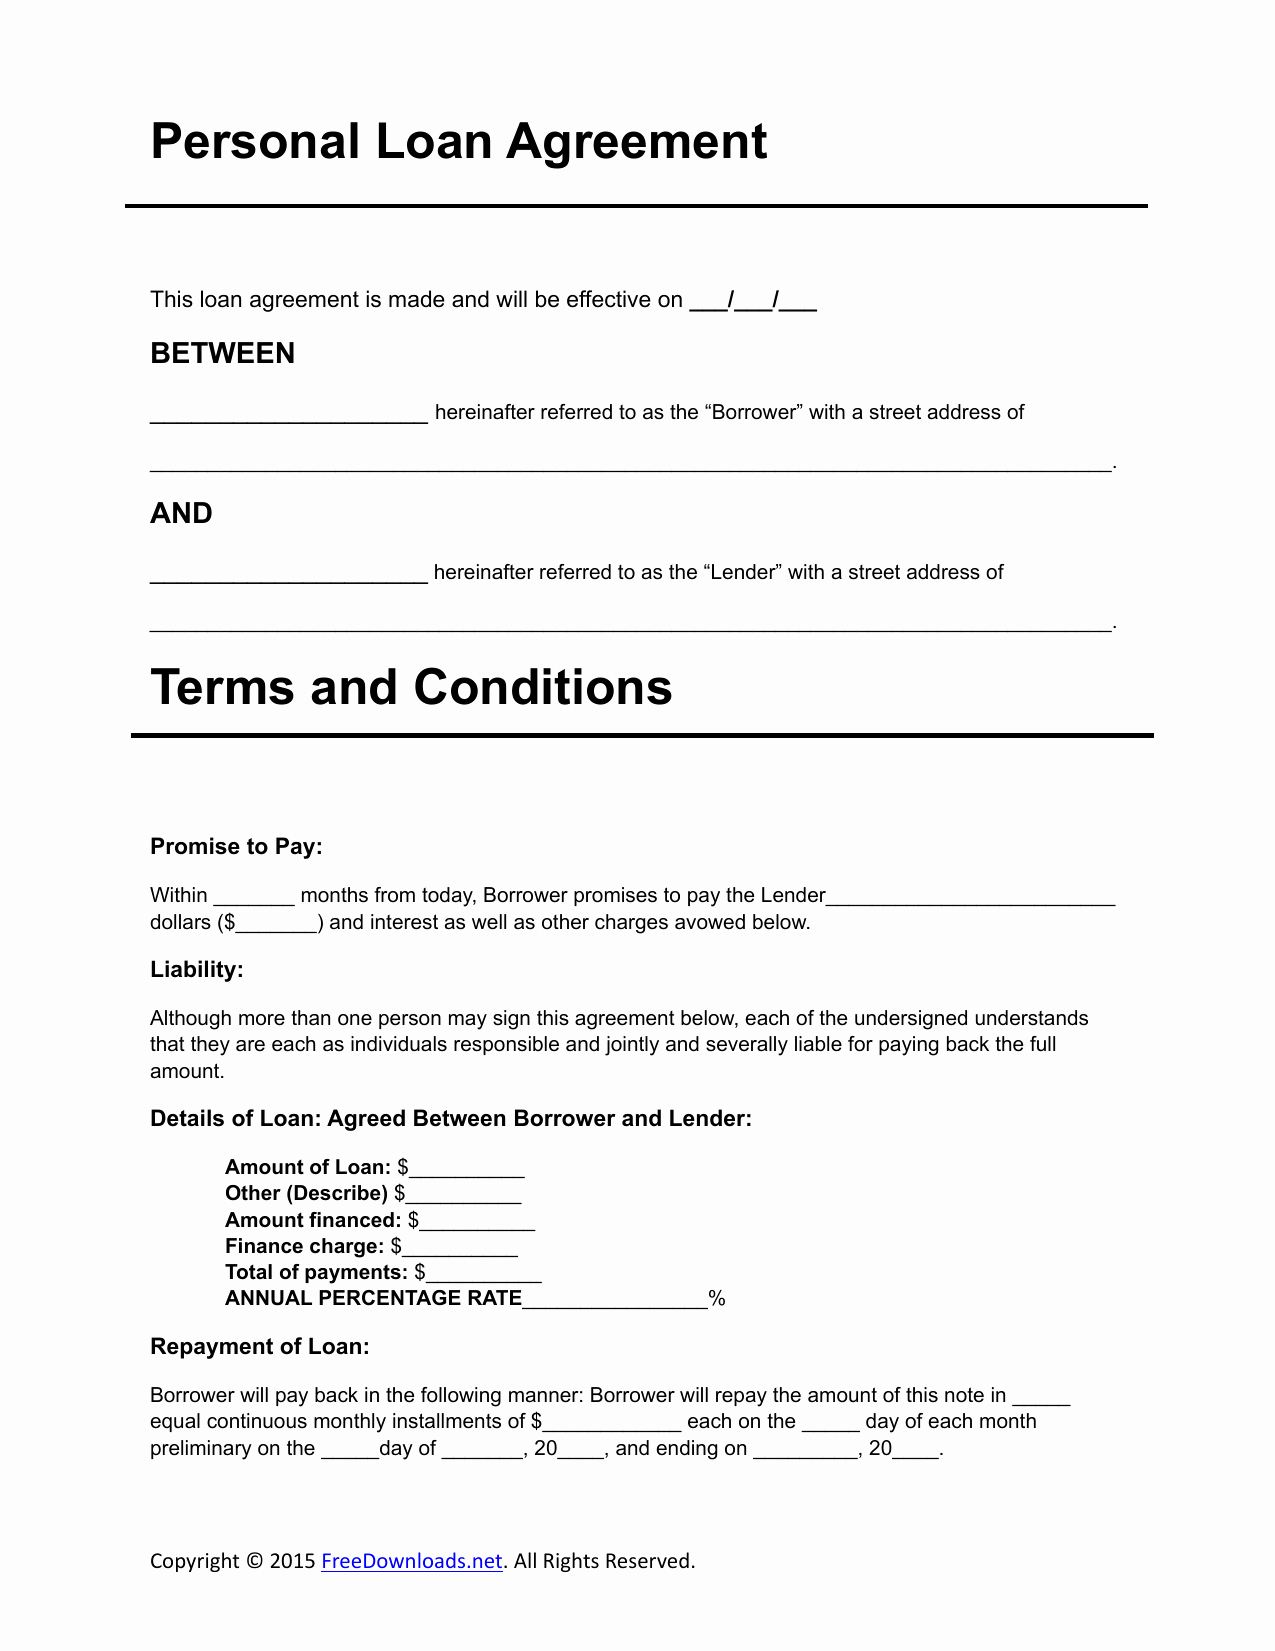 Free Loan Contract Template Beautiful Download Personal Loan Agreement Template Pdf